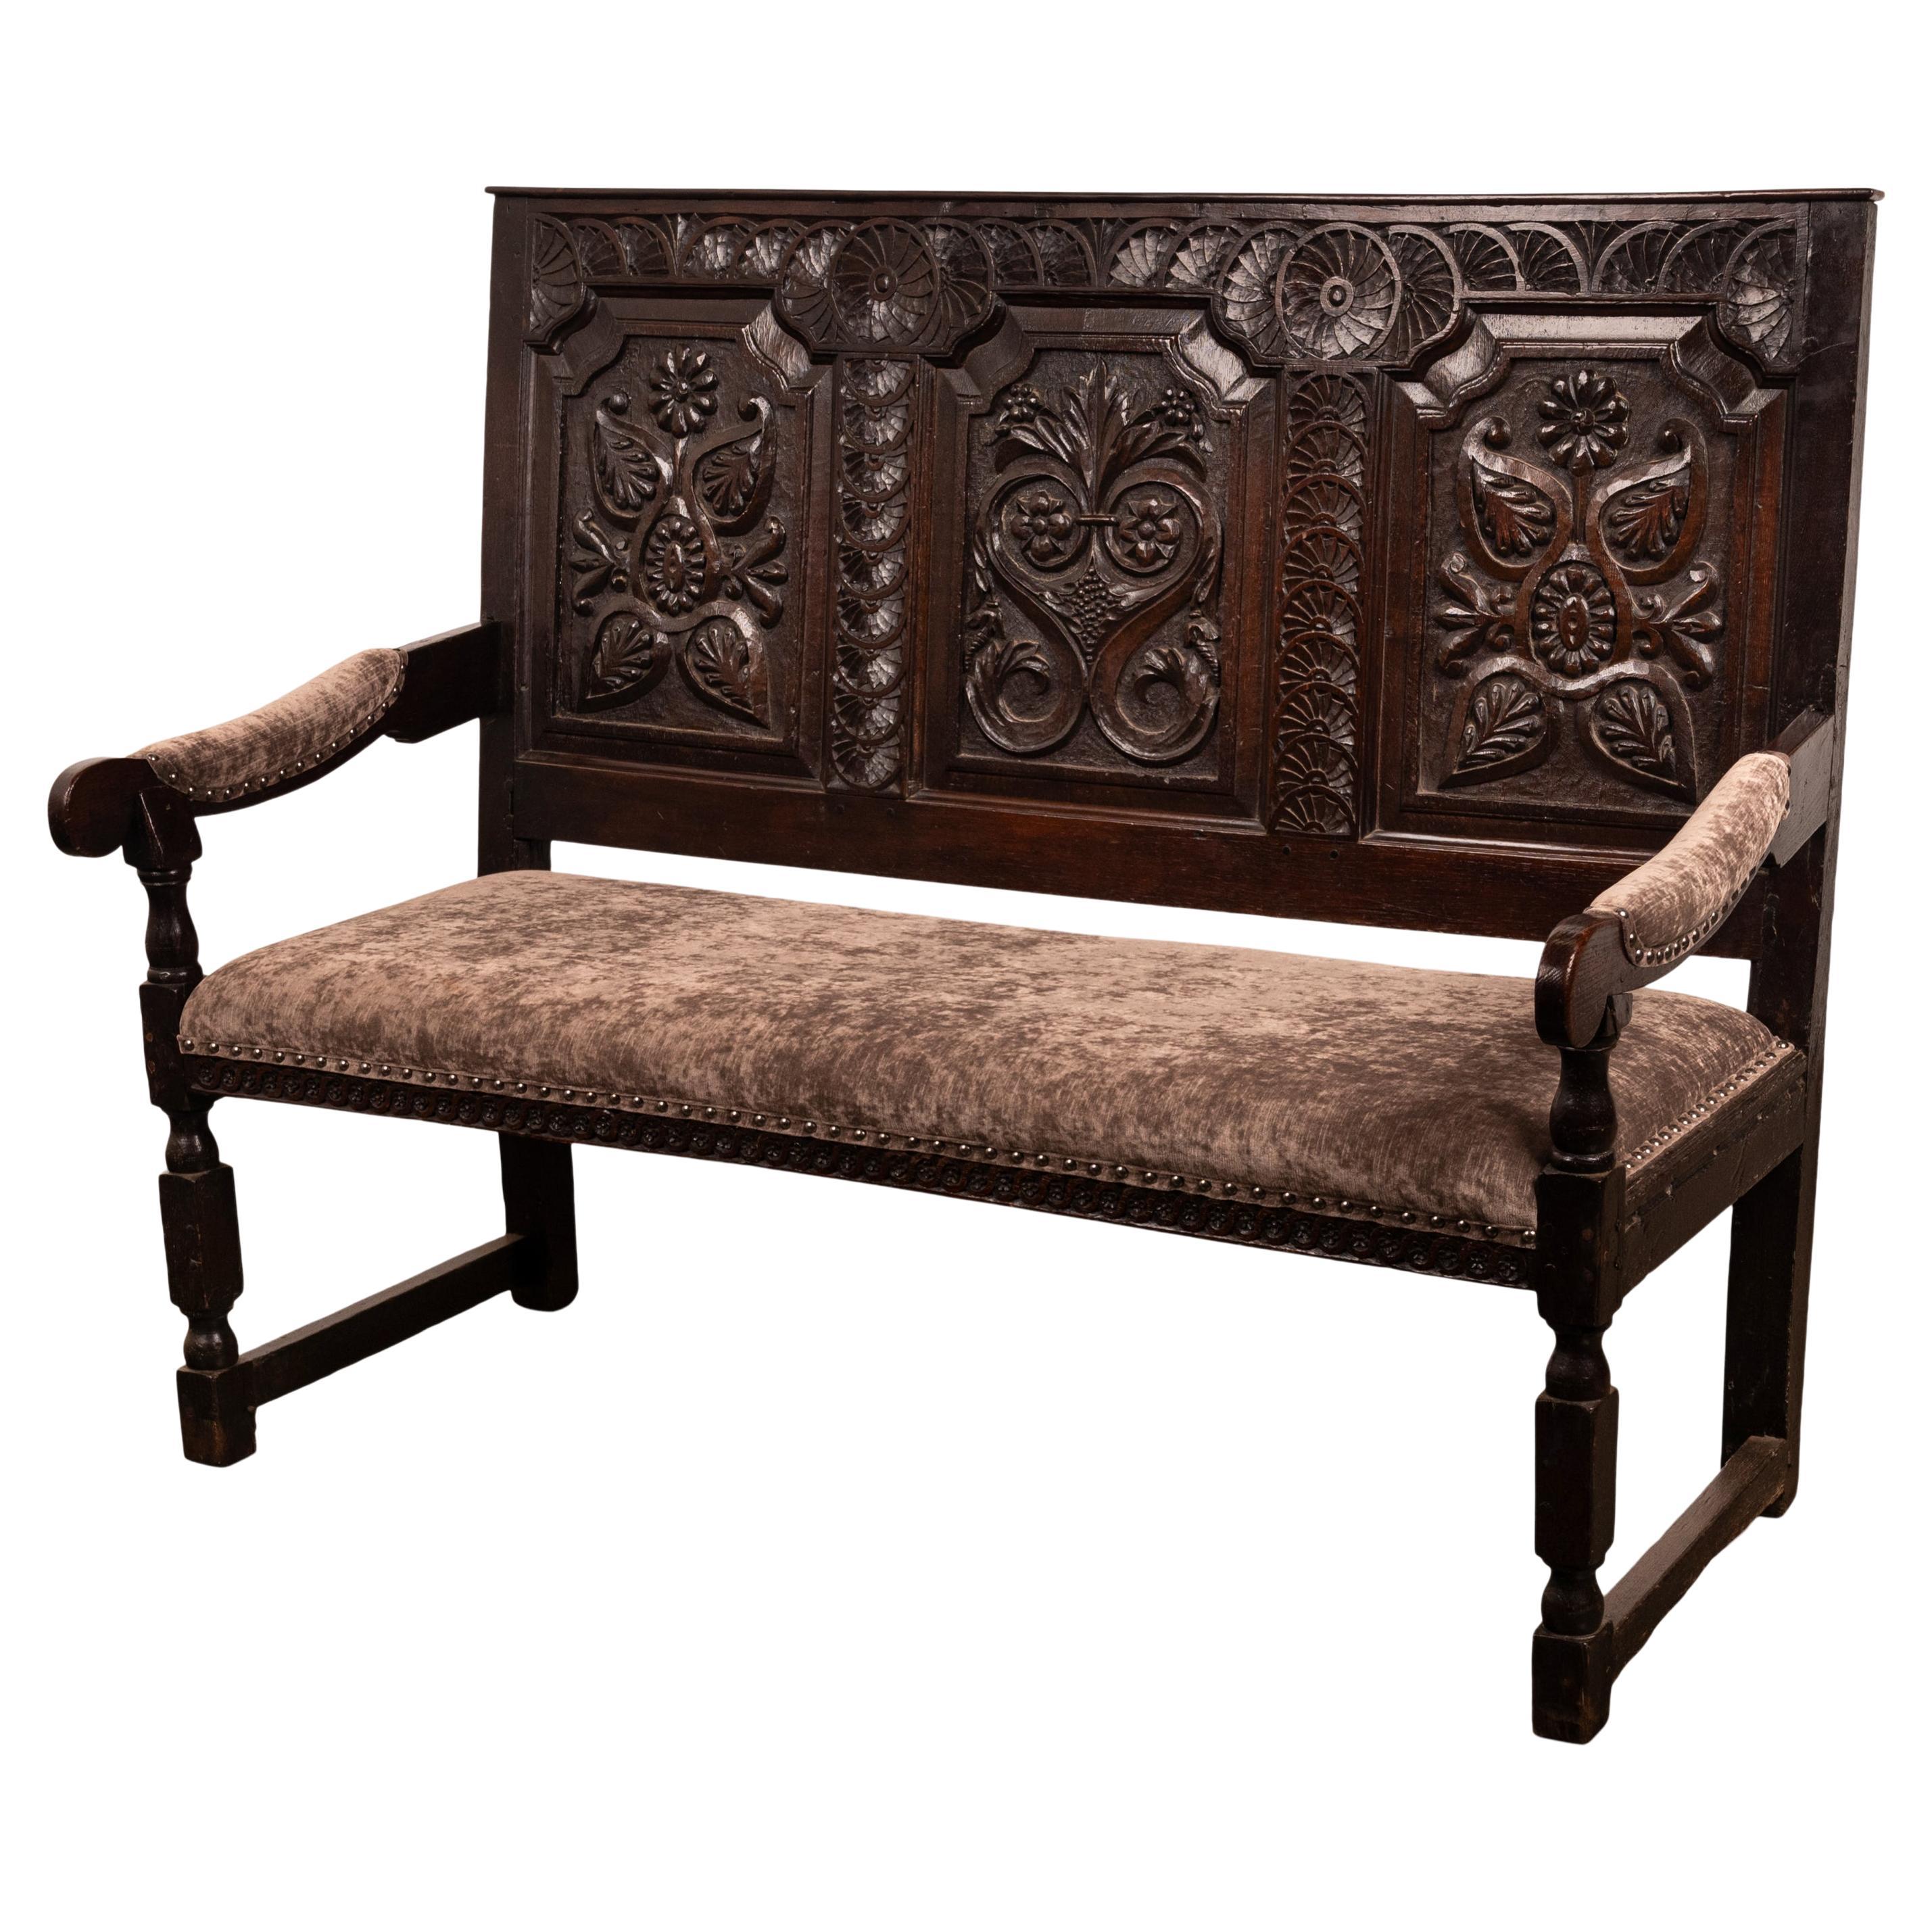 Antique English 17th Century King Charles II Carved Oak Settle Sofa Bench 1680